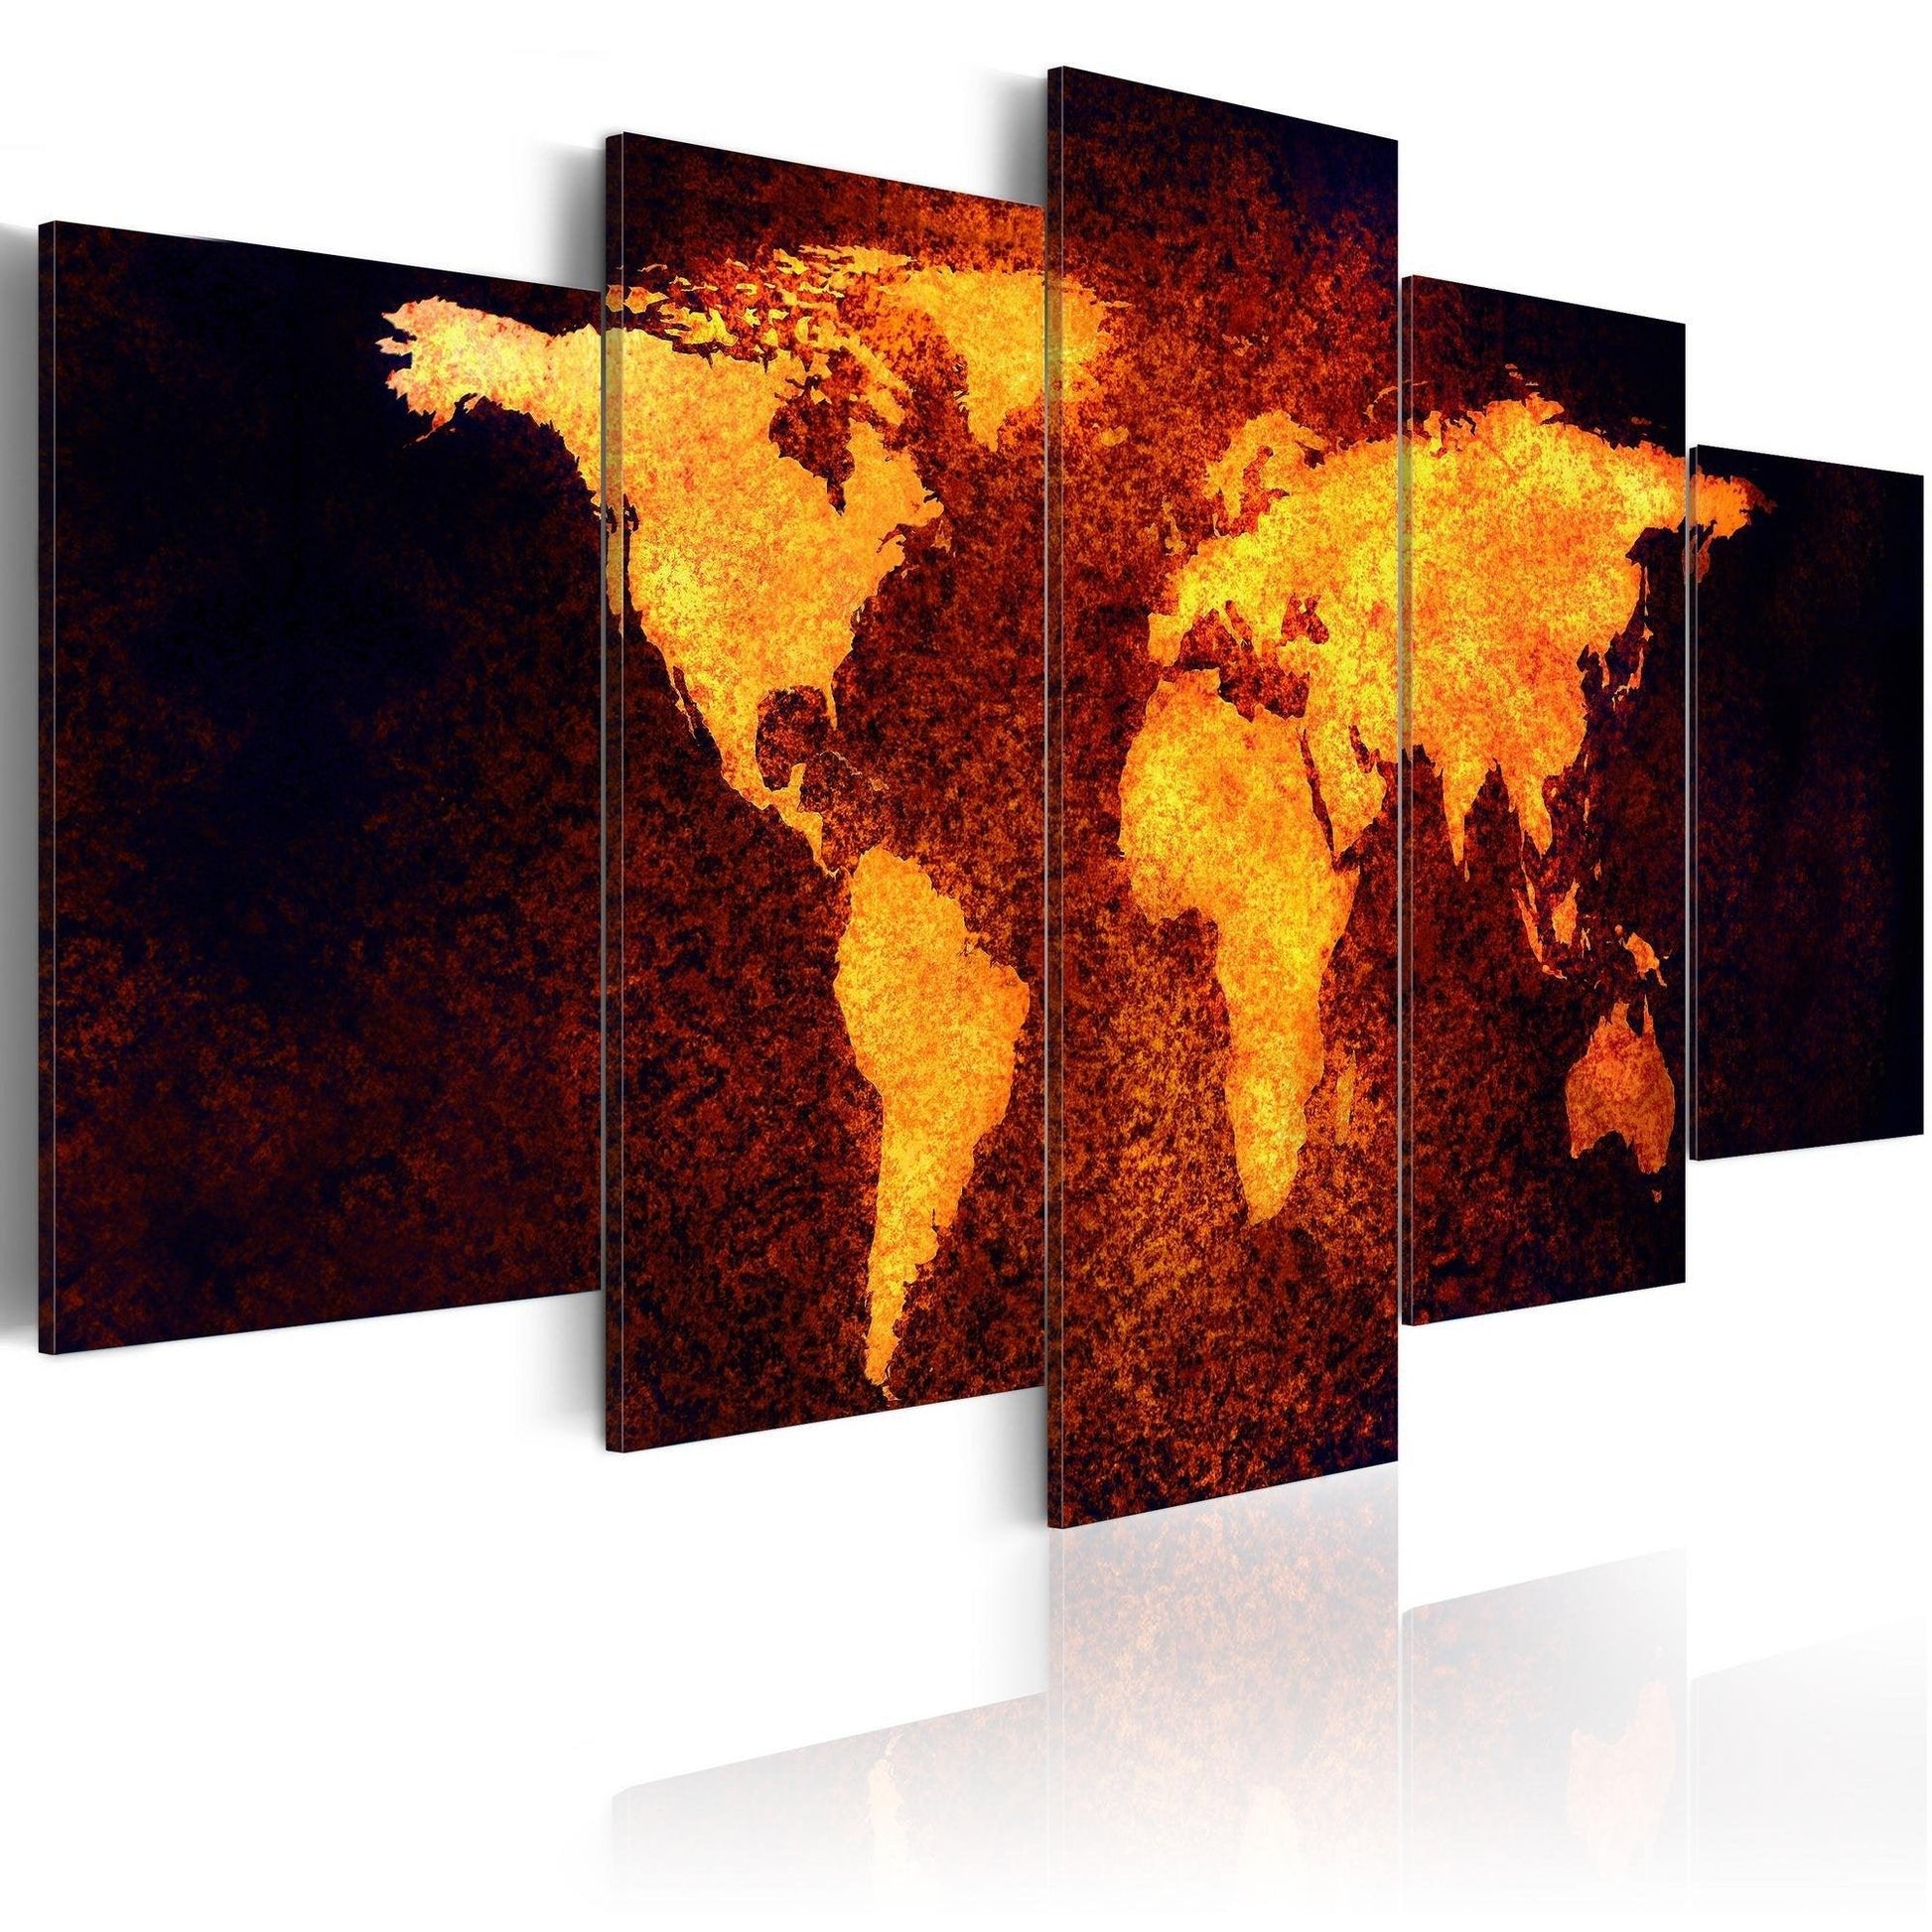 Canvas Print - Map of the World - Hot lava - www.trendingbestsellers.com